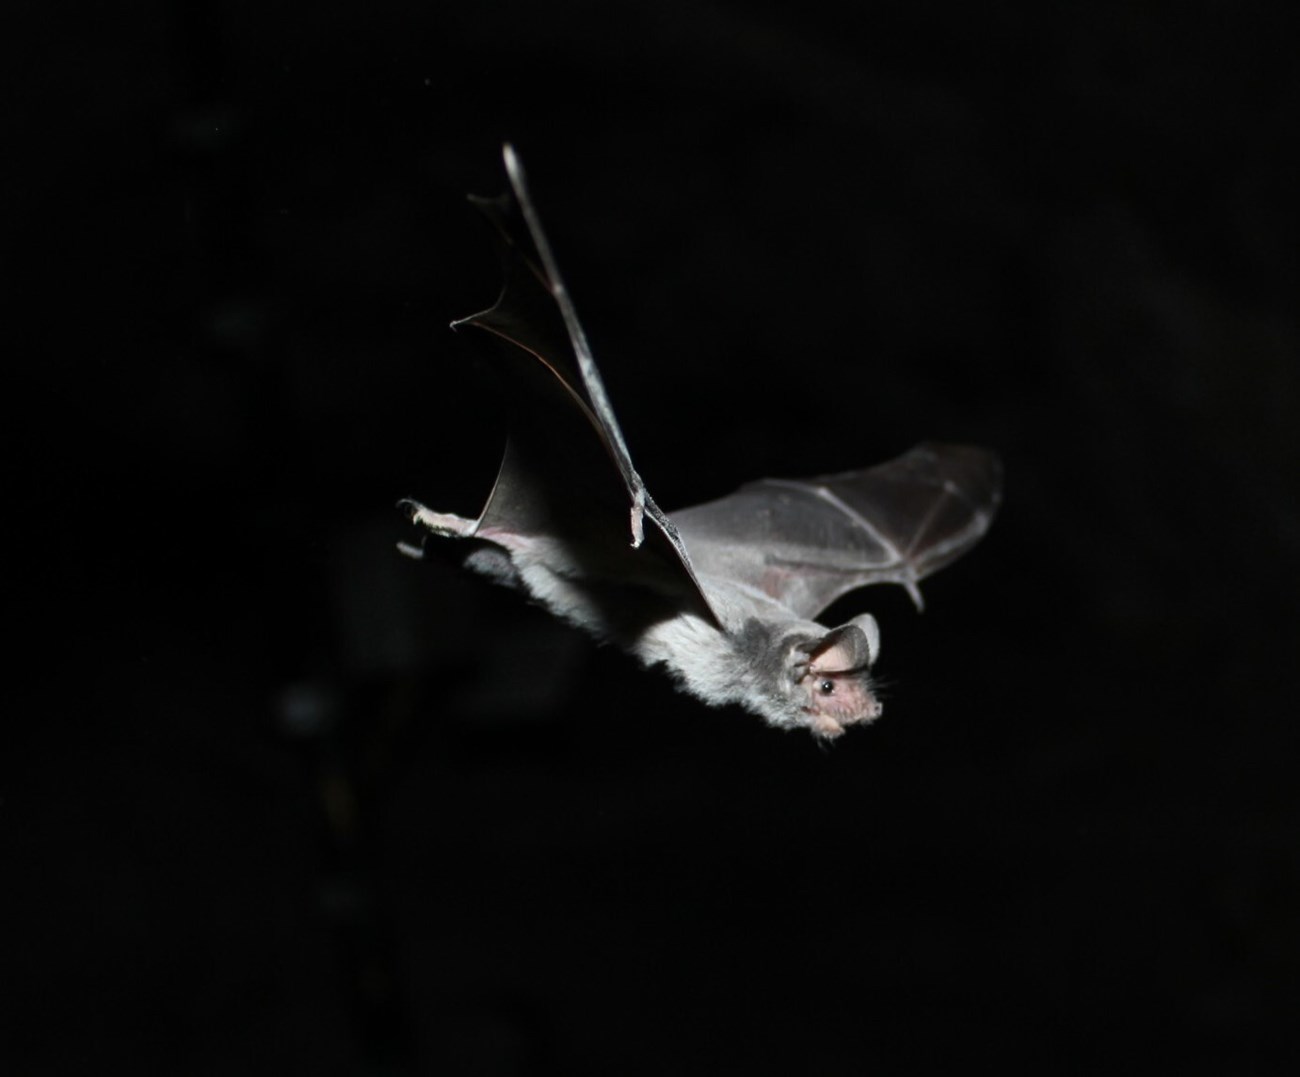 A bat with large ears and squished face flies through the night, highlighted against the black background.